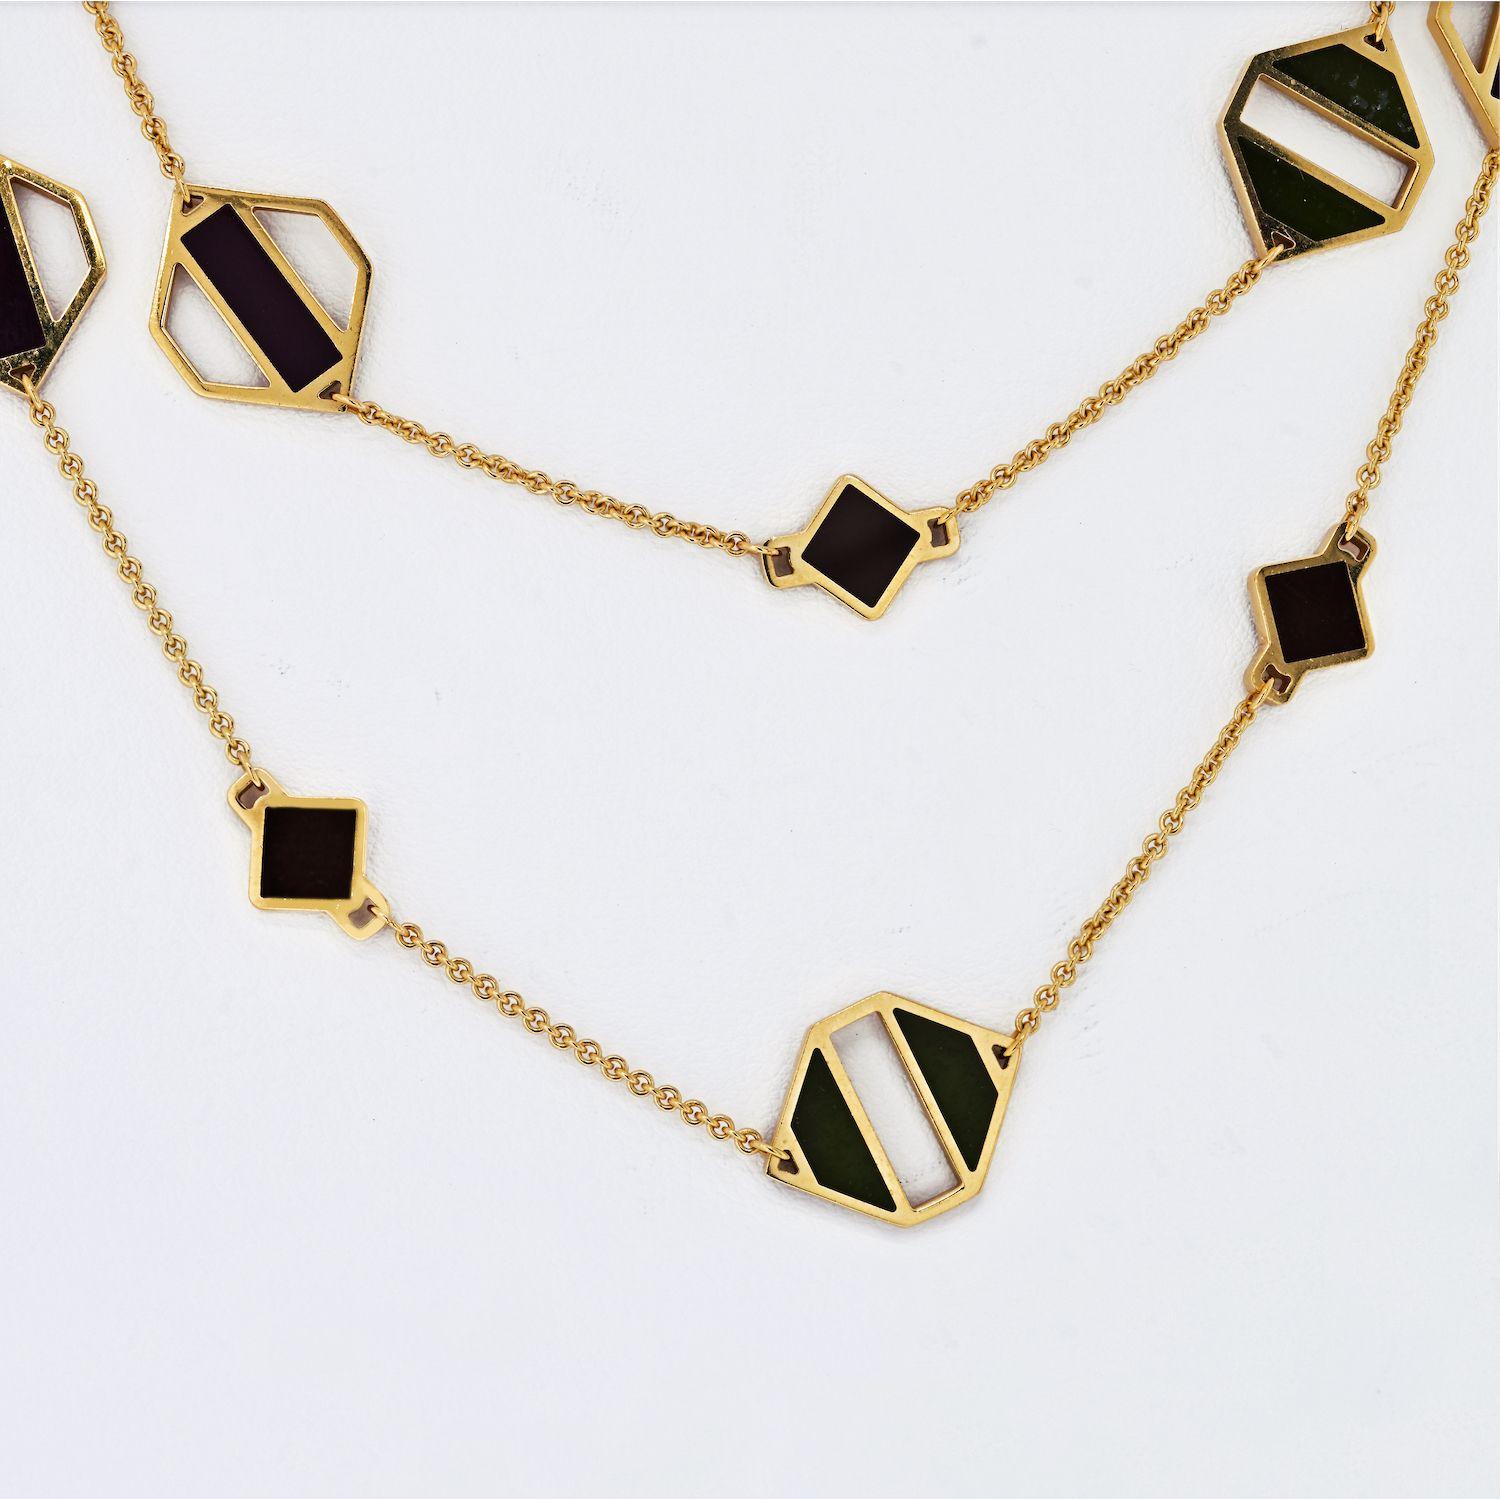 Tiffany & Co. 18K Yellow Gold Paloma Picasso Enamel Station Chain Necklace. 36 inches. Delicate and feminine design. 
